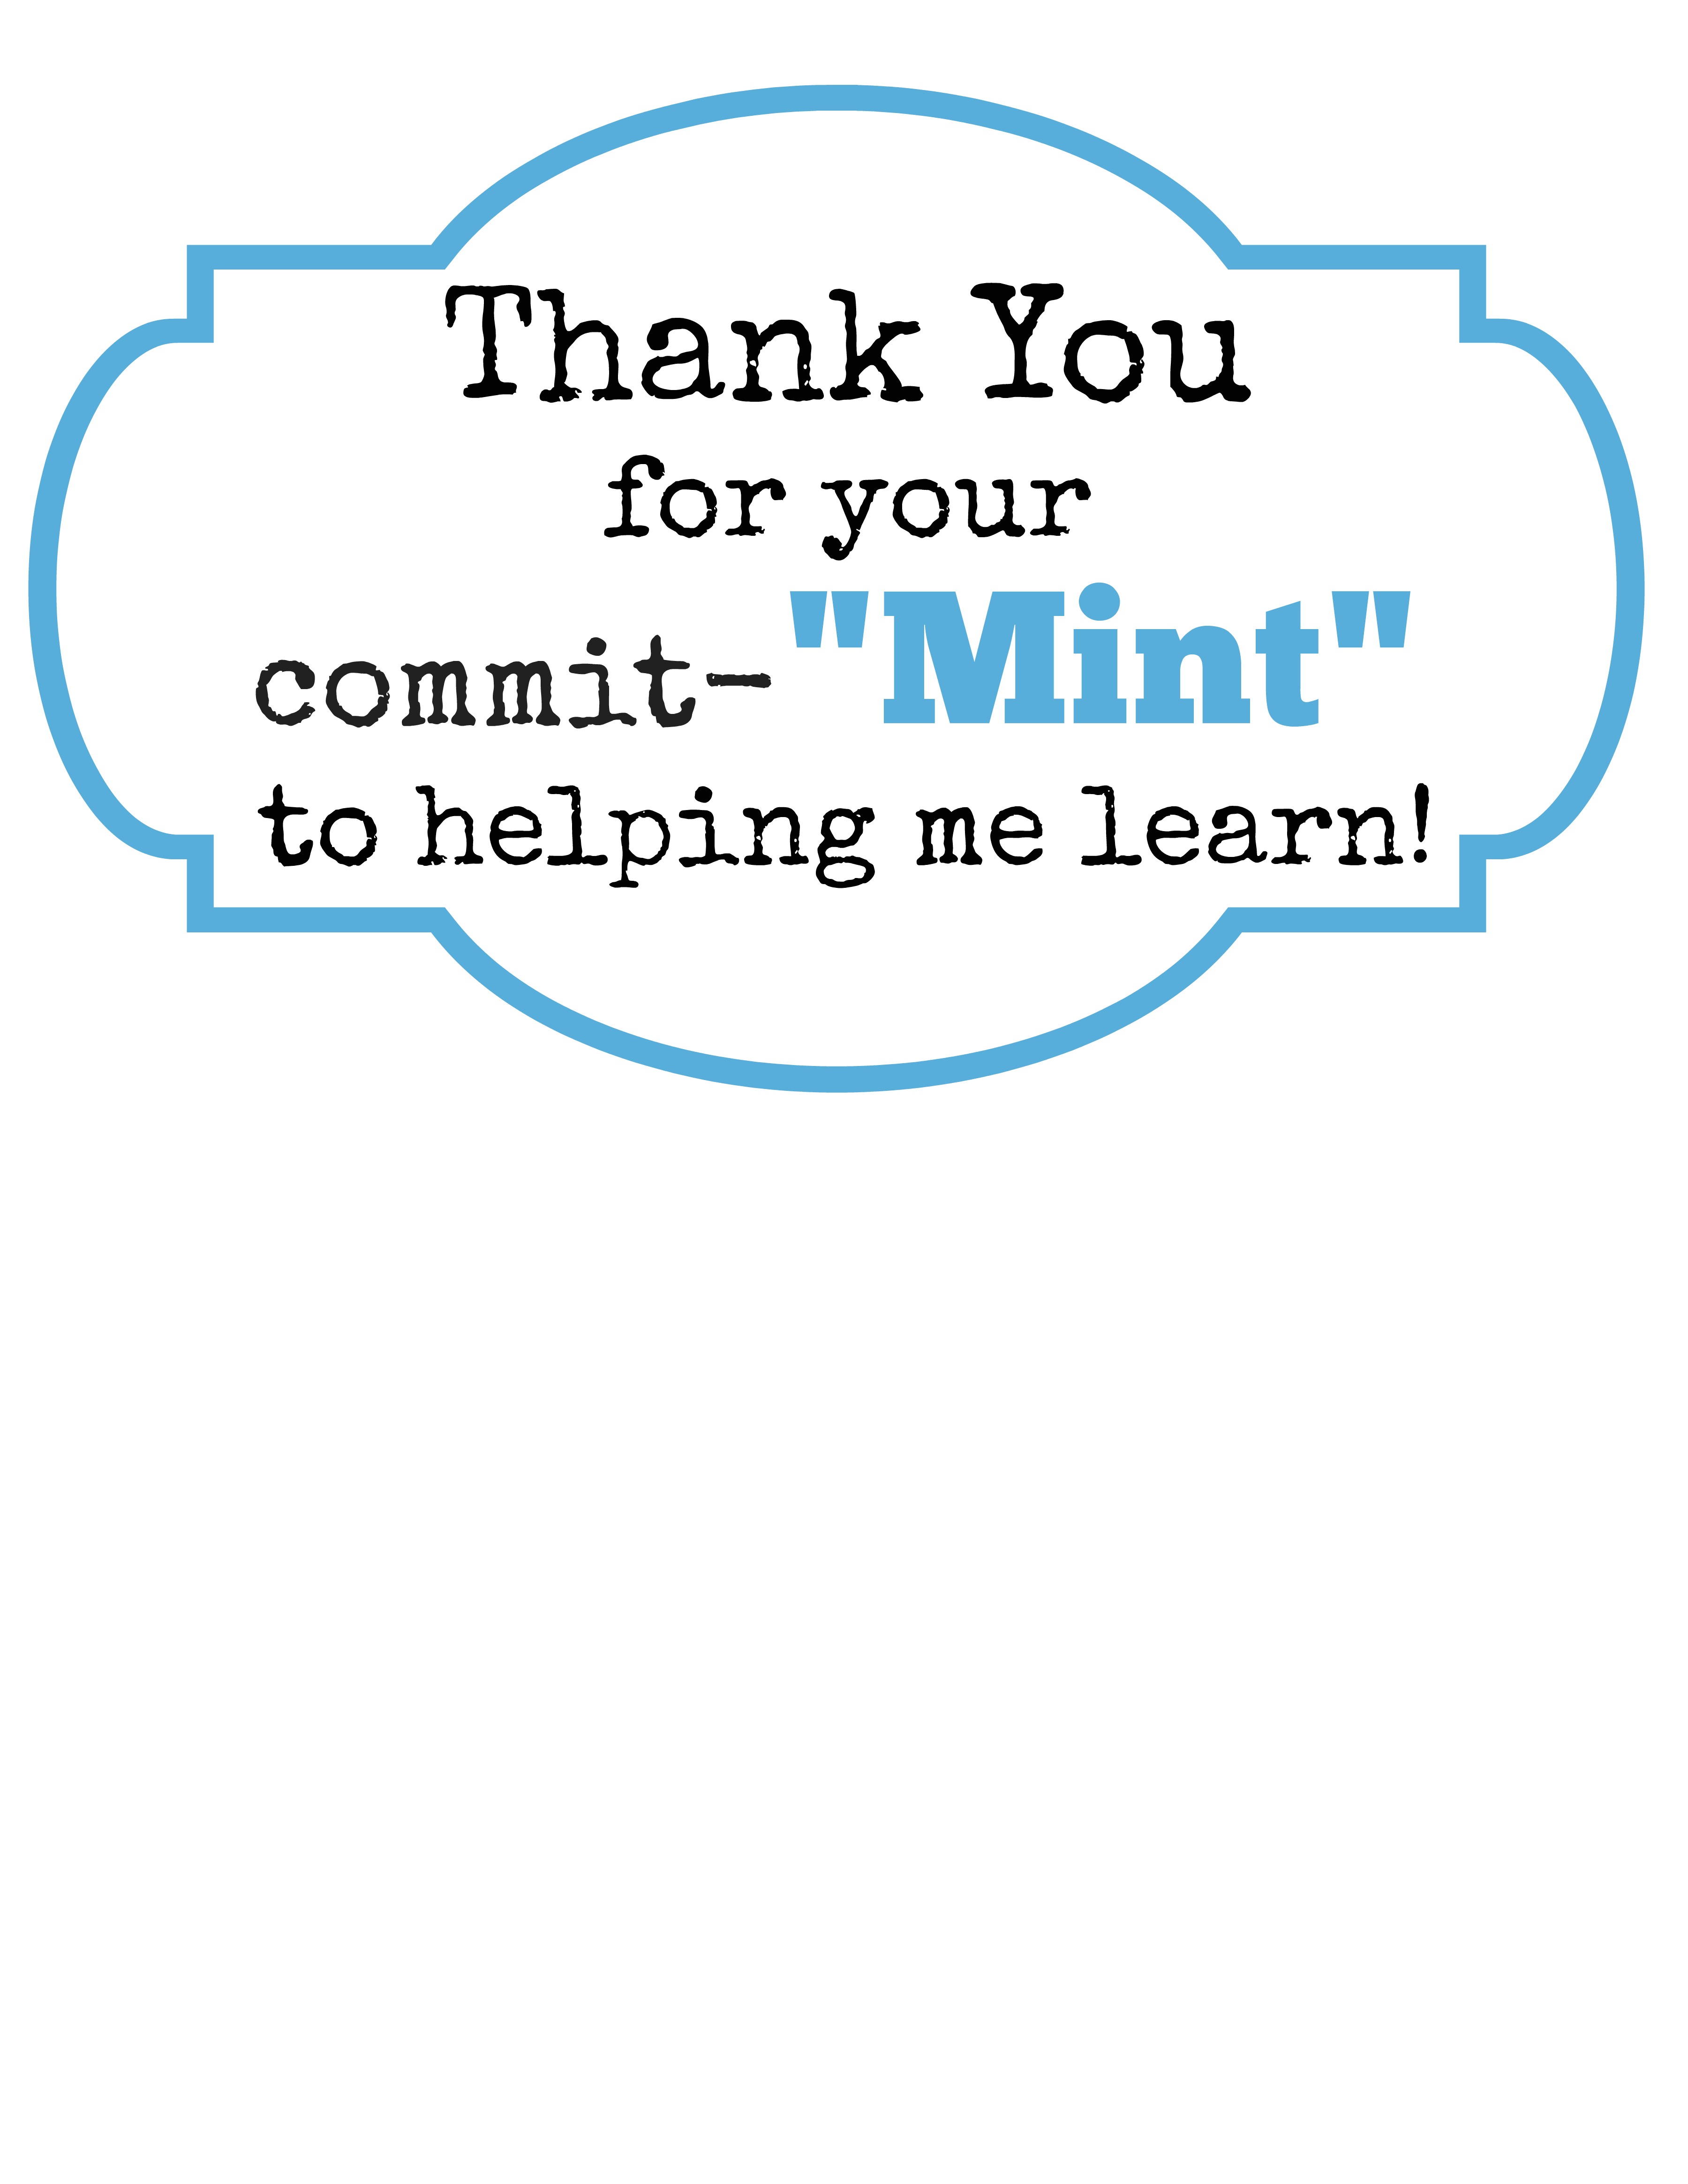 Teacher Gift Idea 'Thank You for Your CommitMINT' with FREE Printable